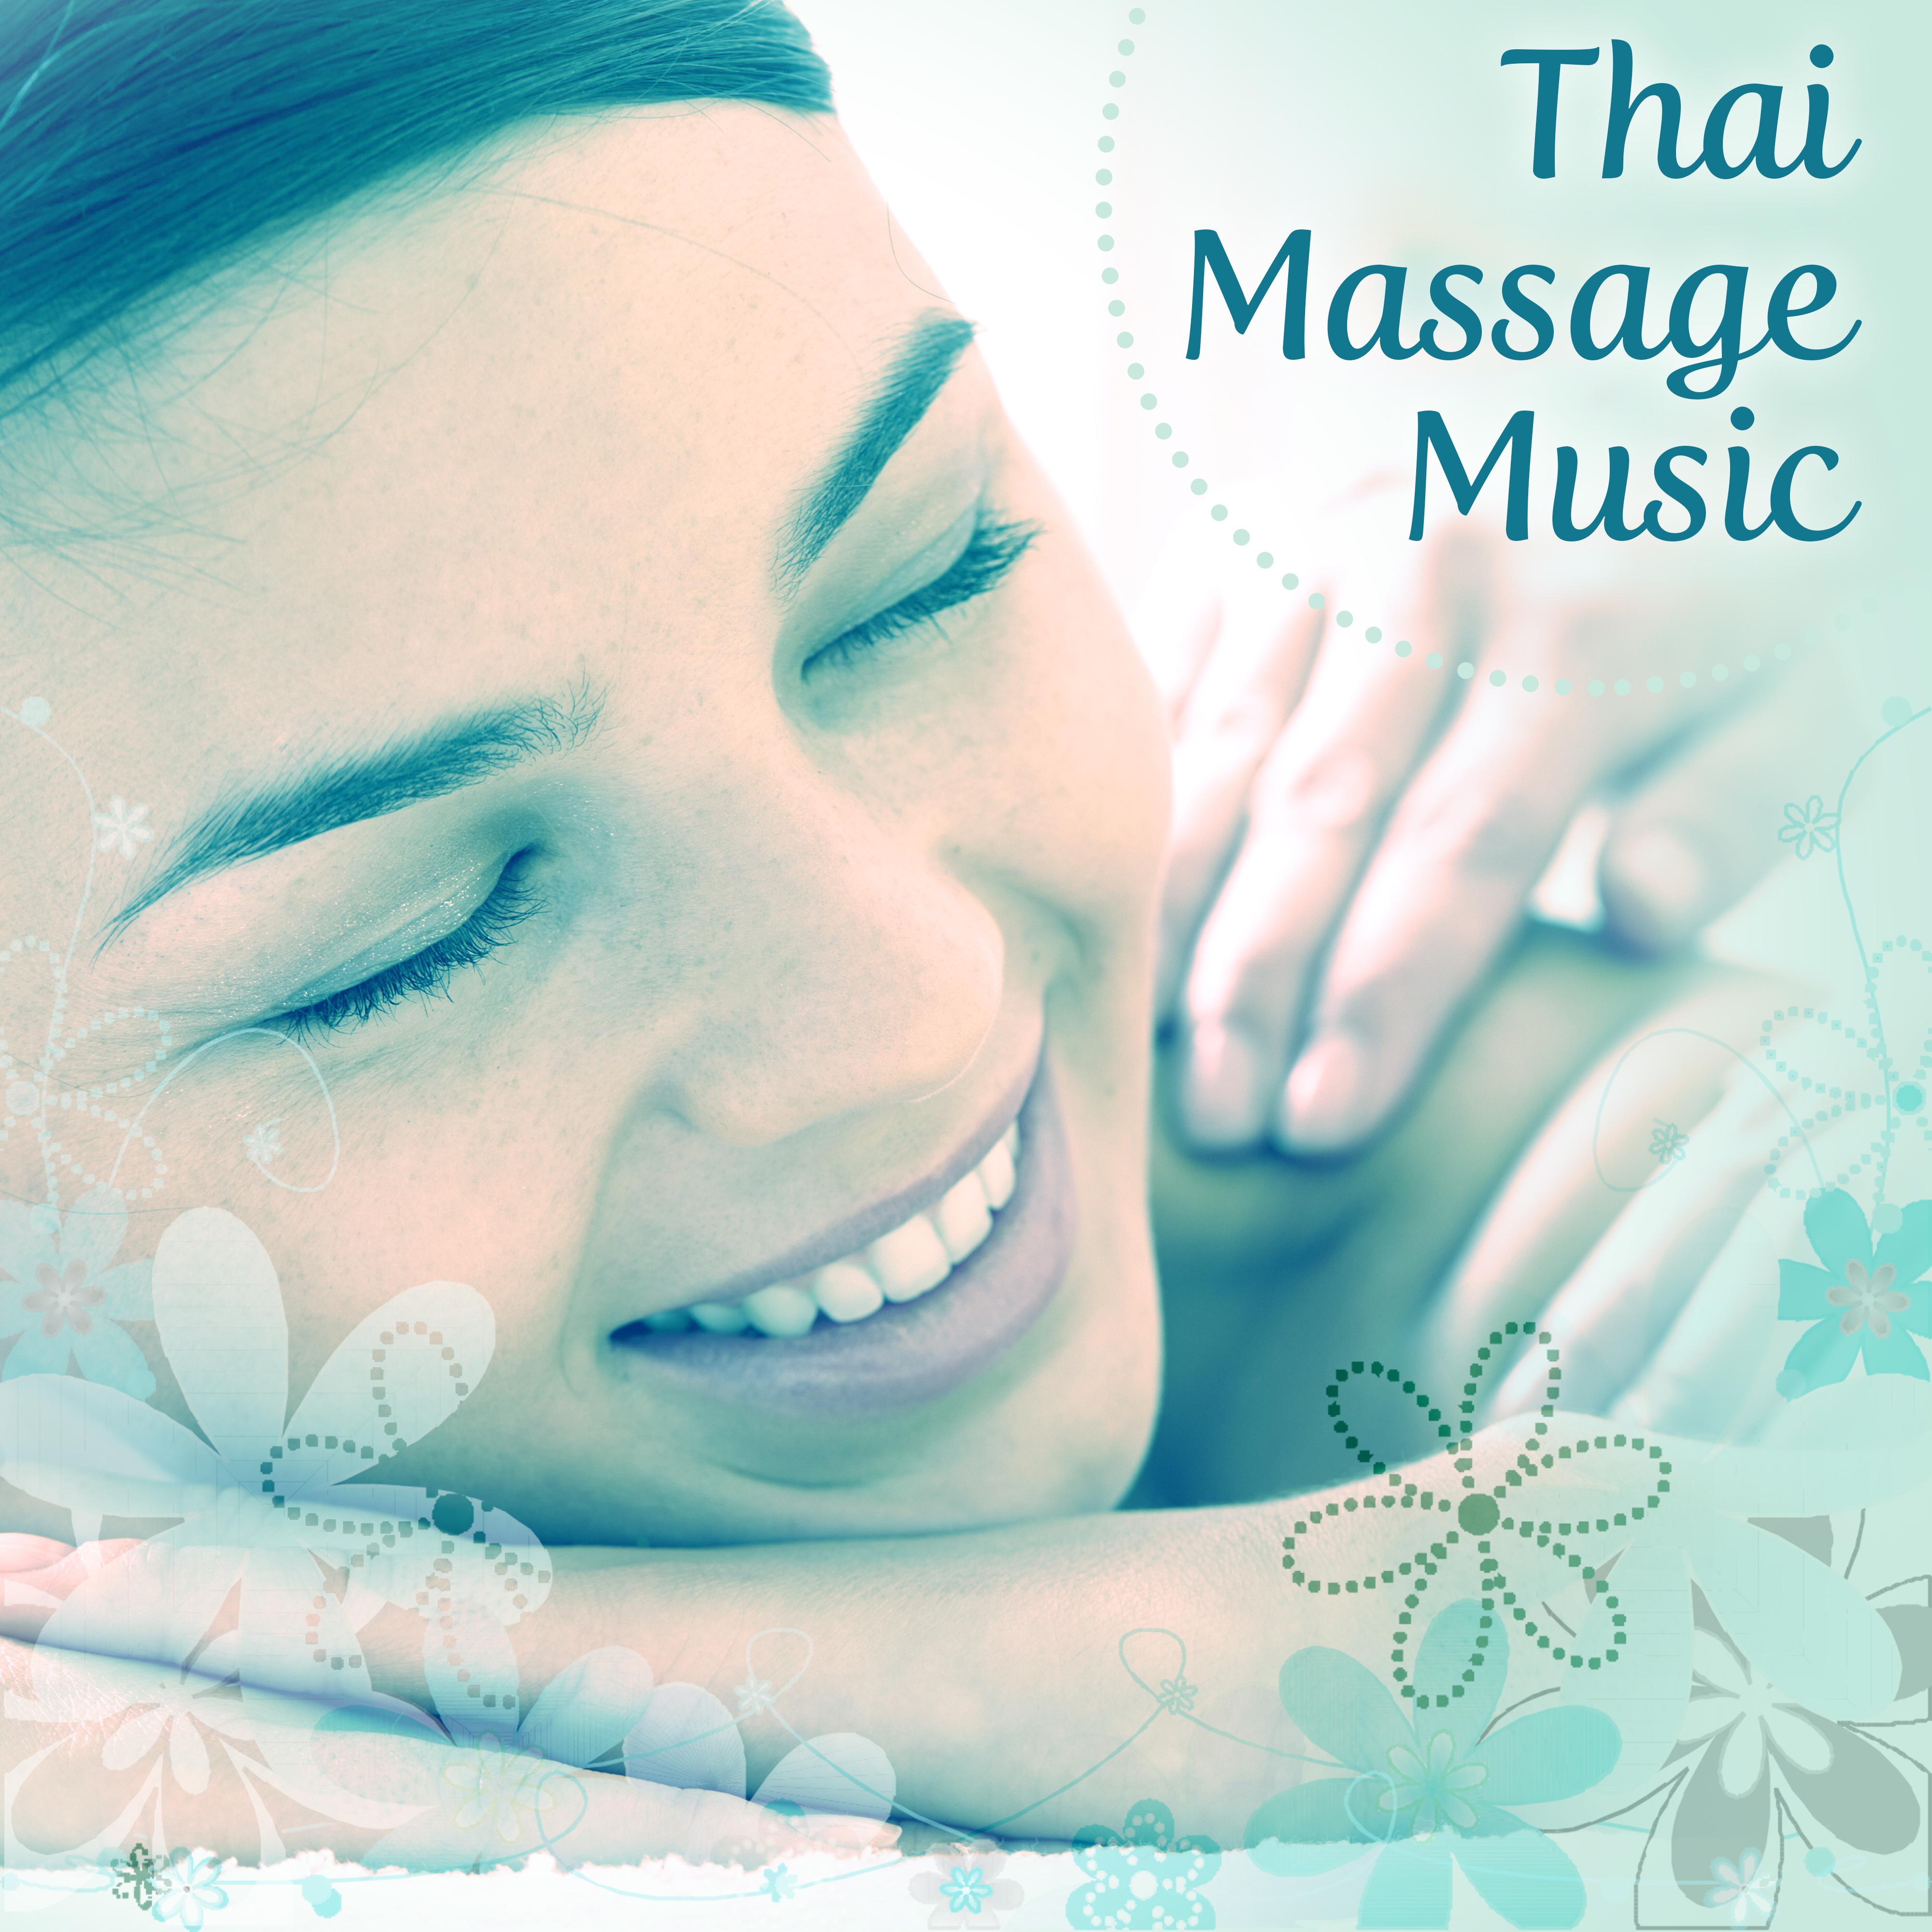 Thai Massage Music – Calming Sounds of Nature, Massage Music, Deep Relaxation, Restful Spa, Soothing Nature Music